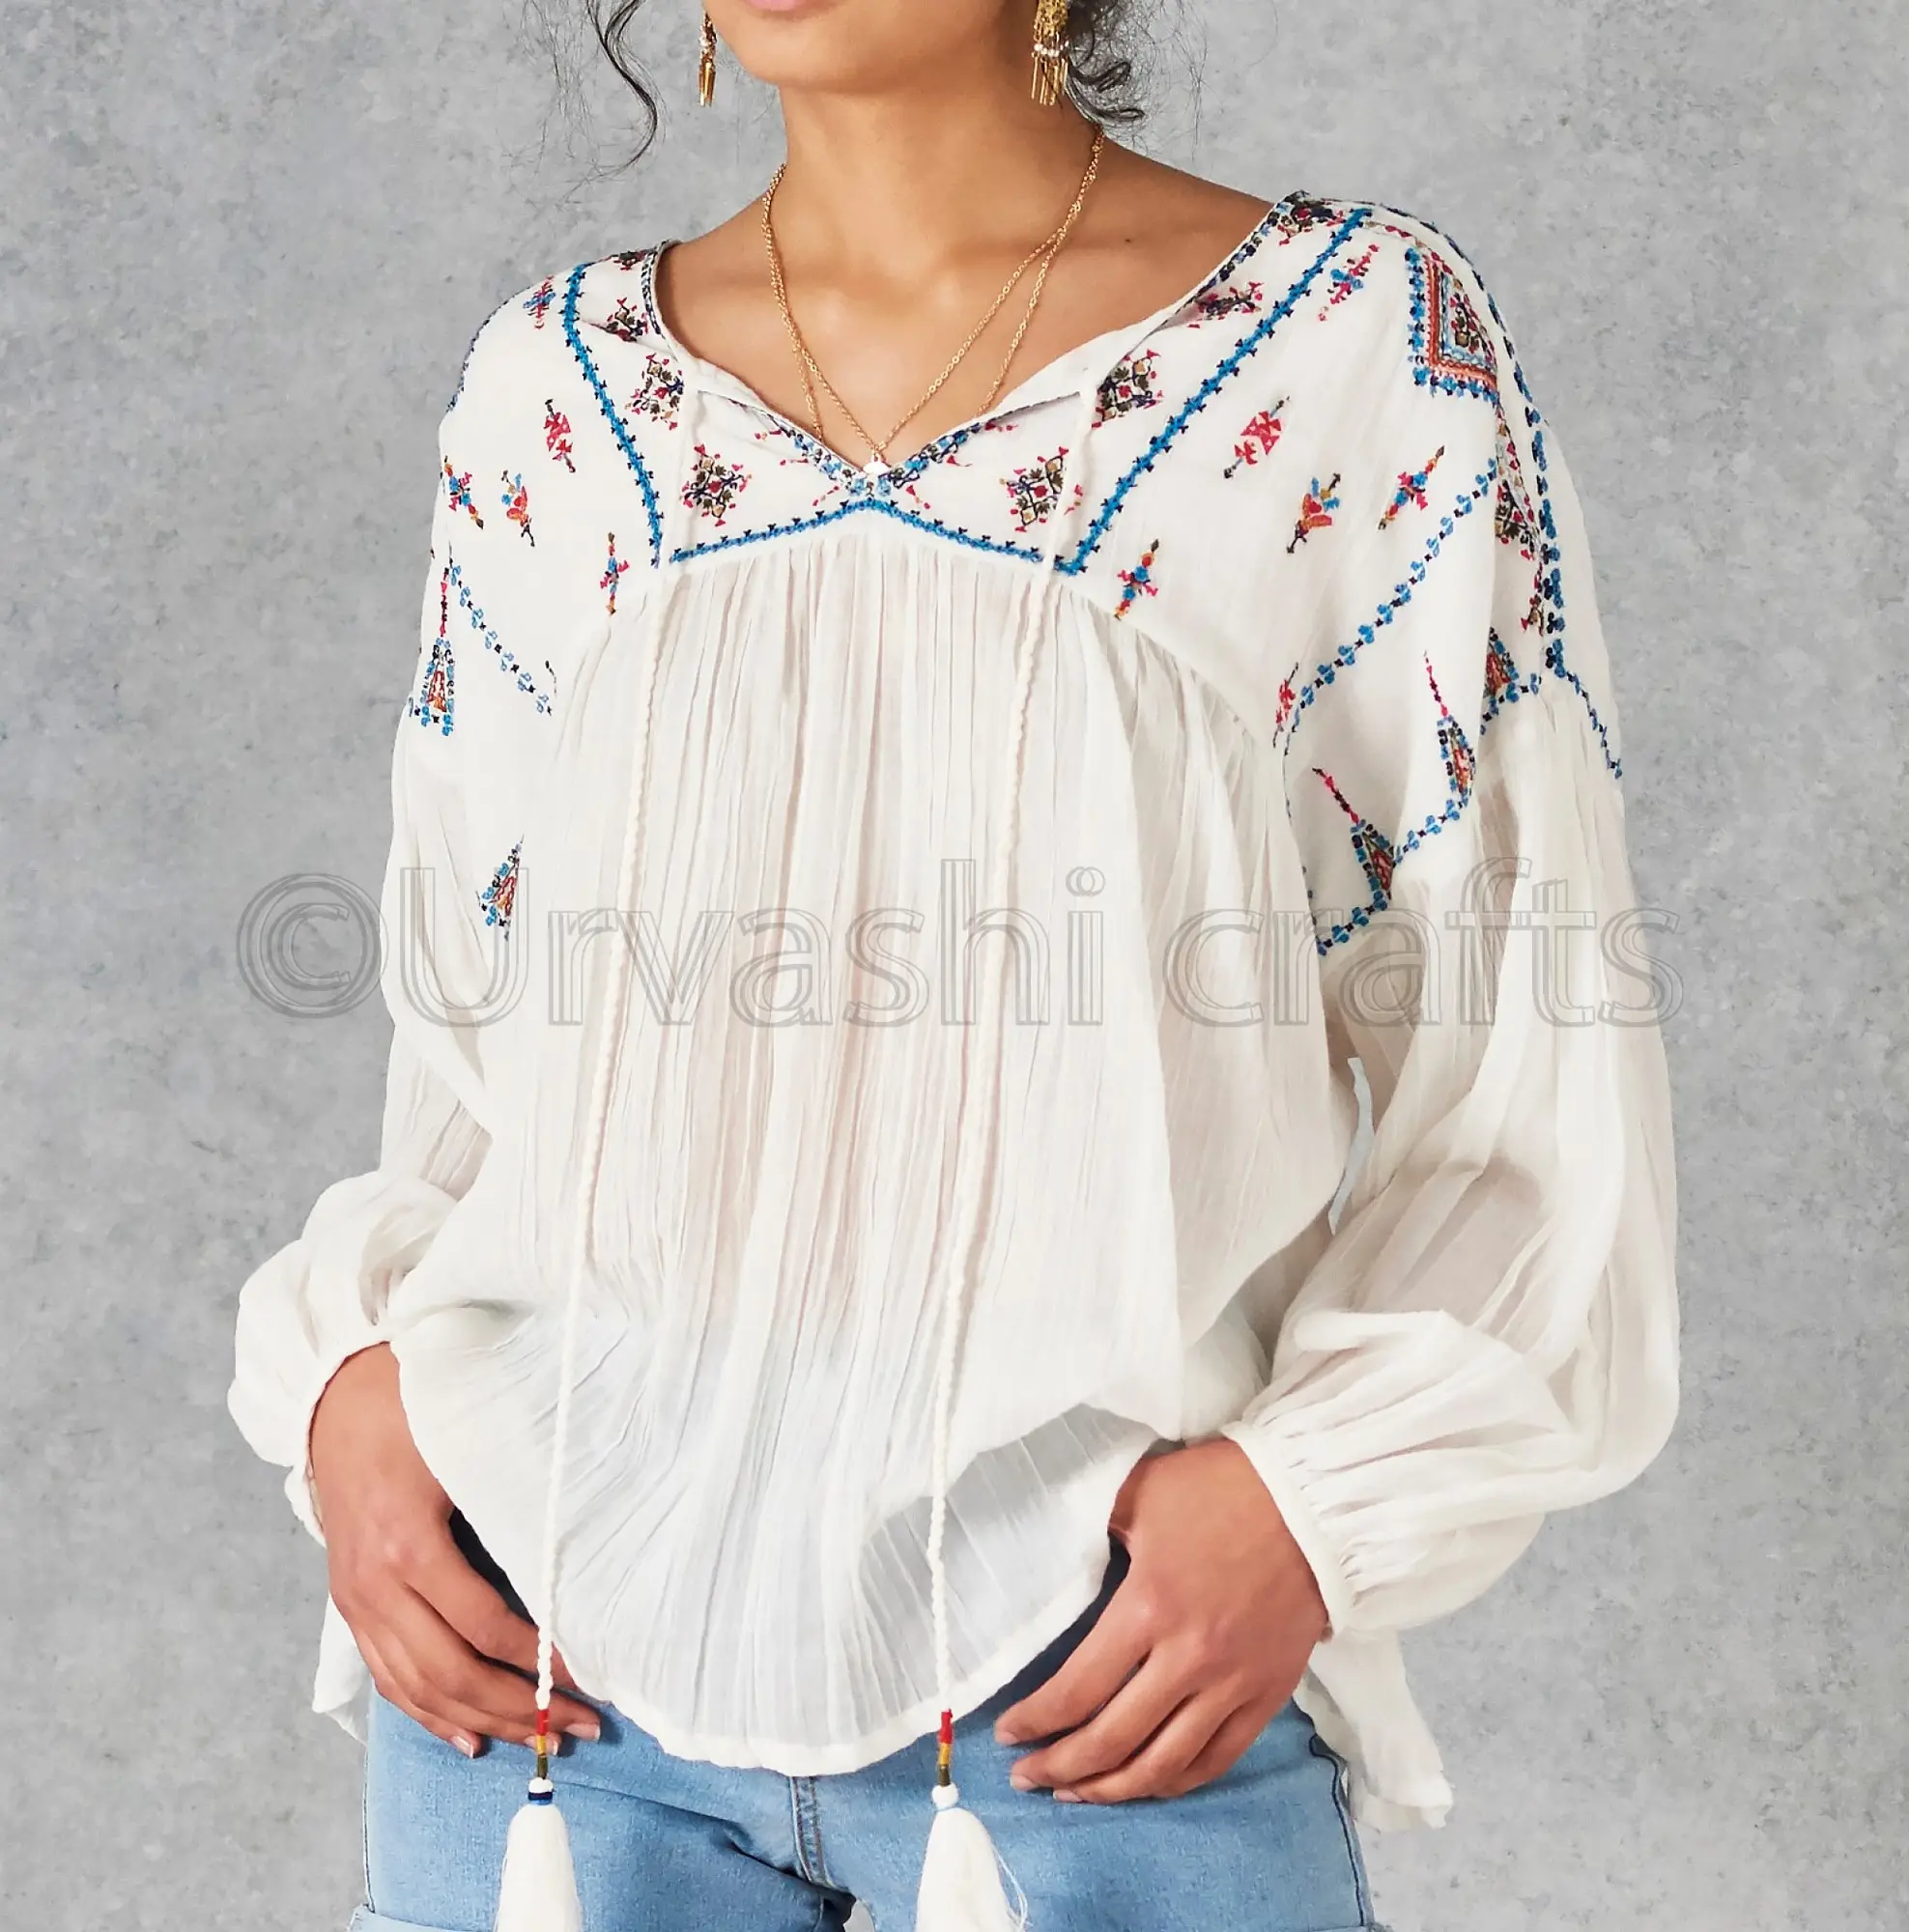 Fashionable Hot Looking Girl's Embroidered Blouse Long Sleeve White Blouses And Top